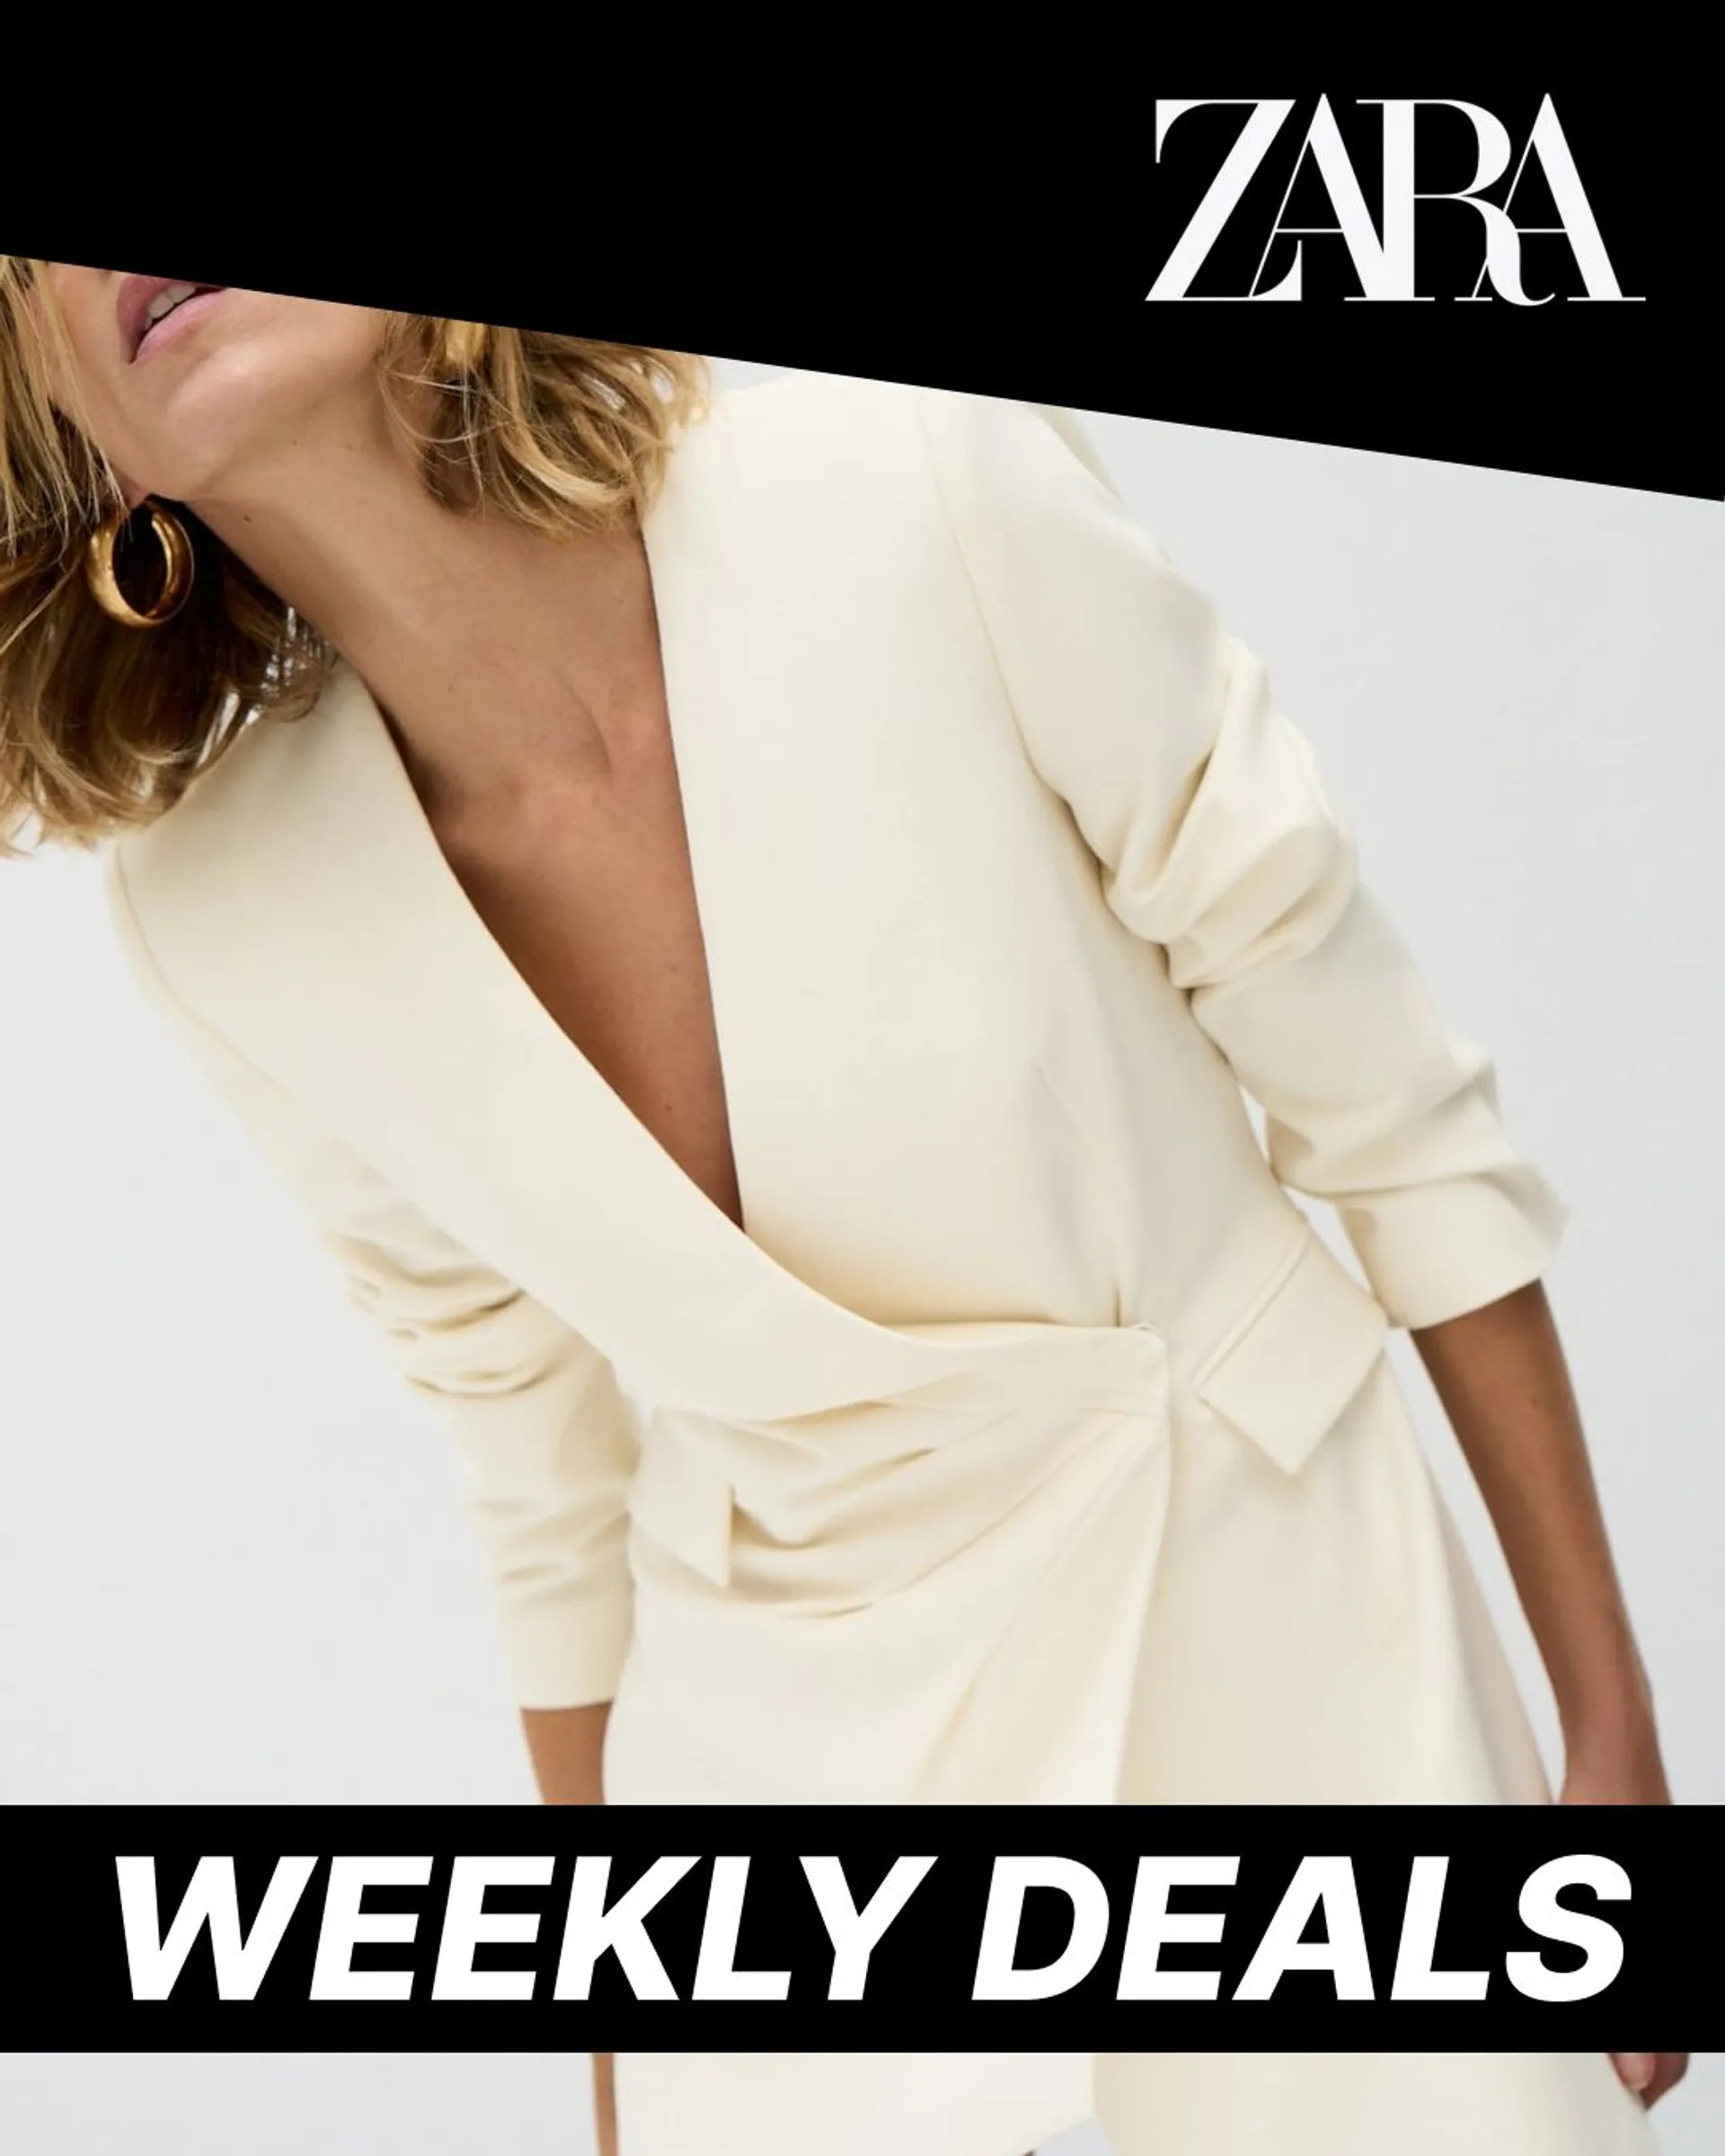 Zara - Special Price! from January 21 to January 26 2023 - flyer page 1